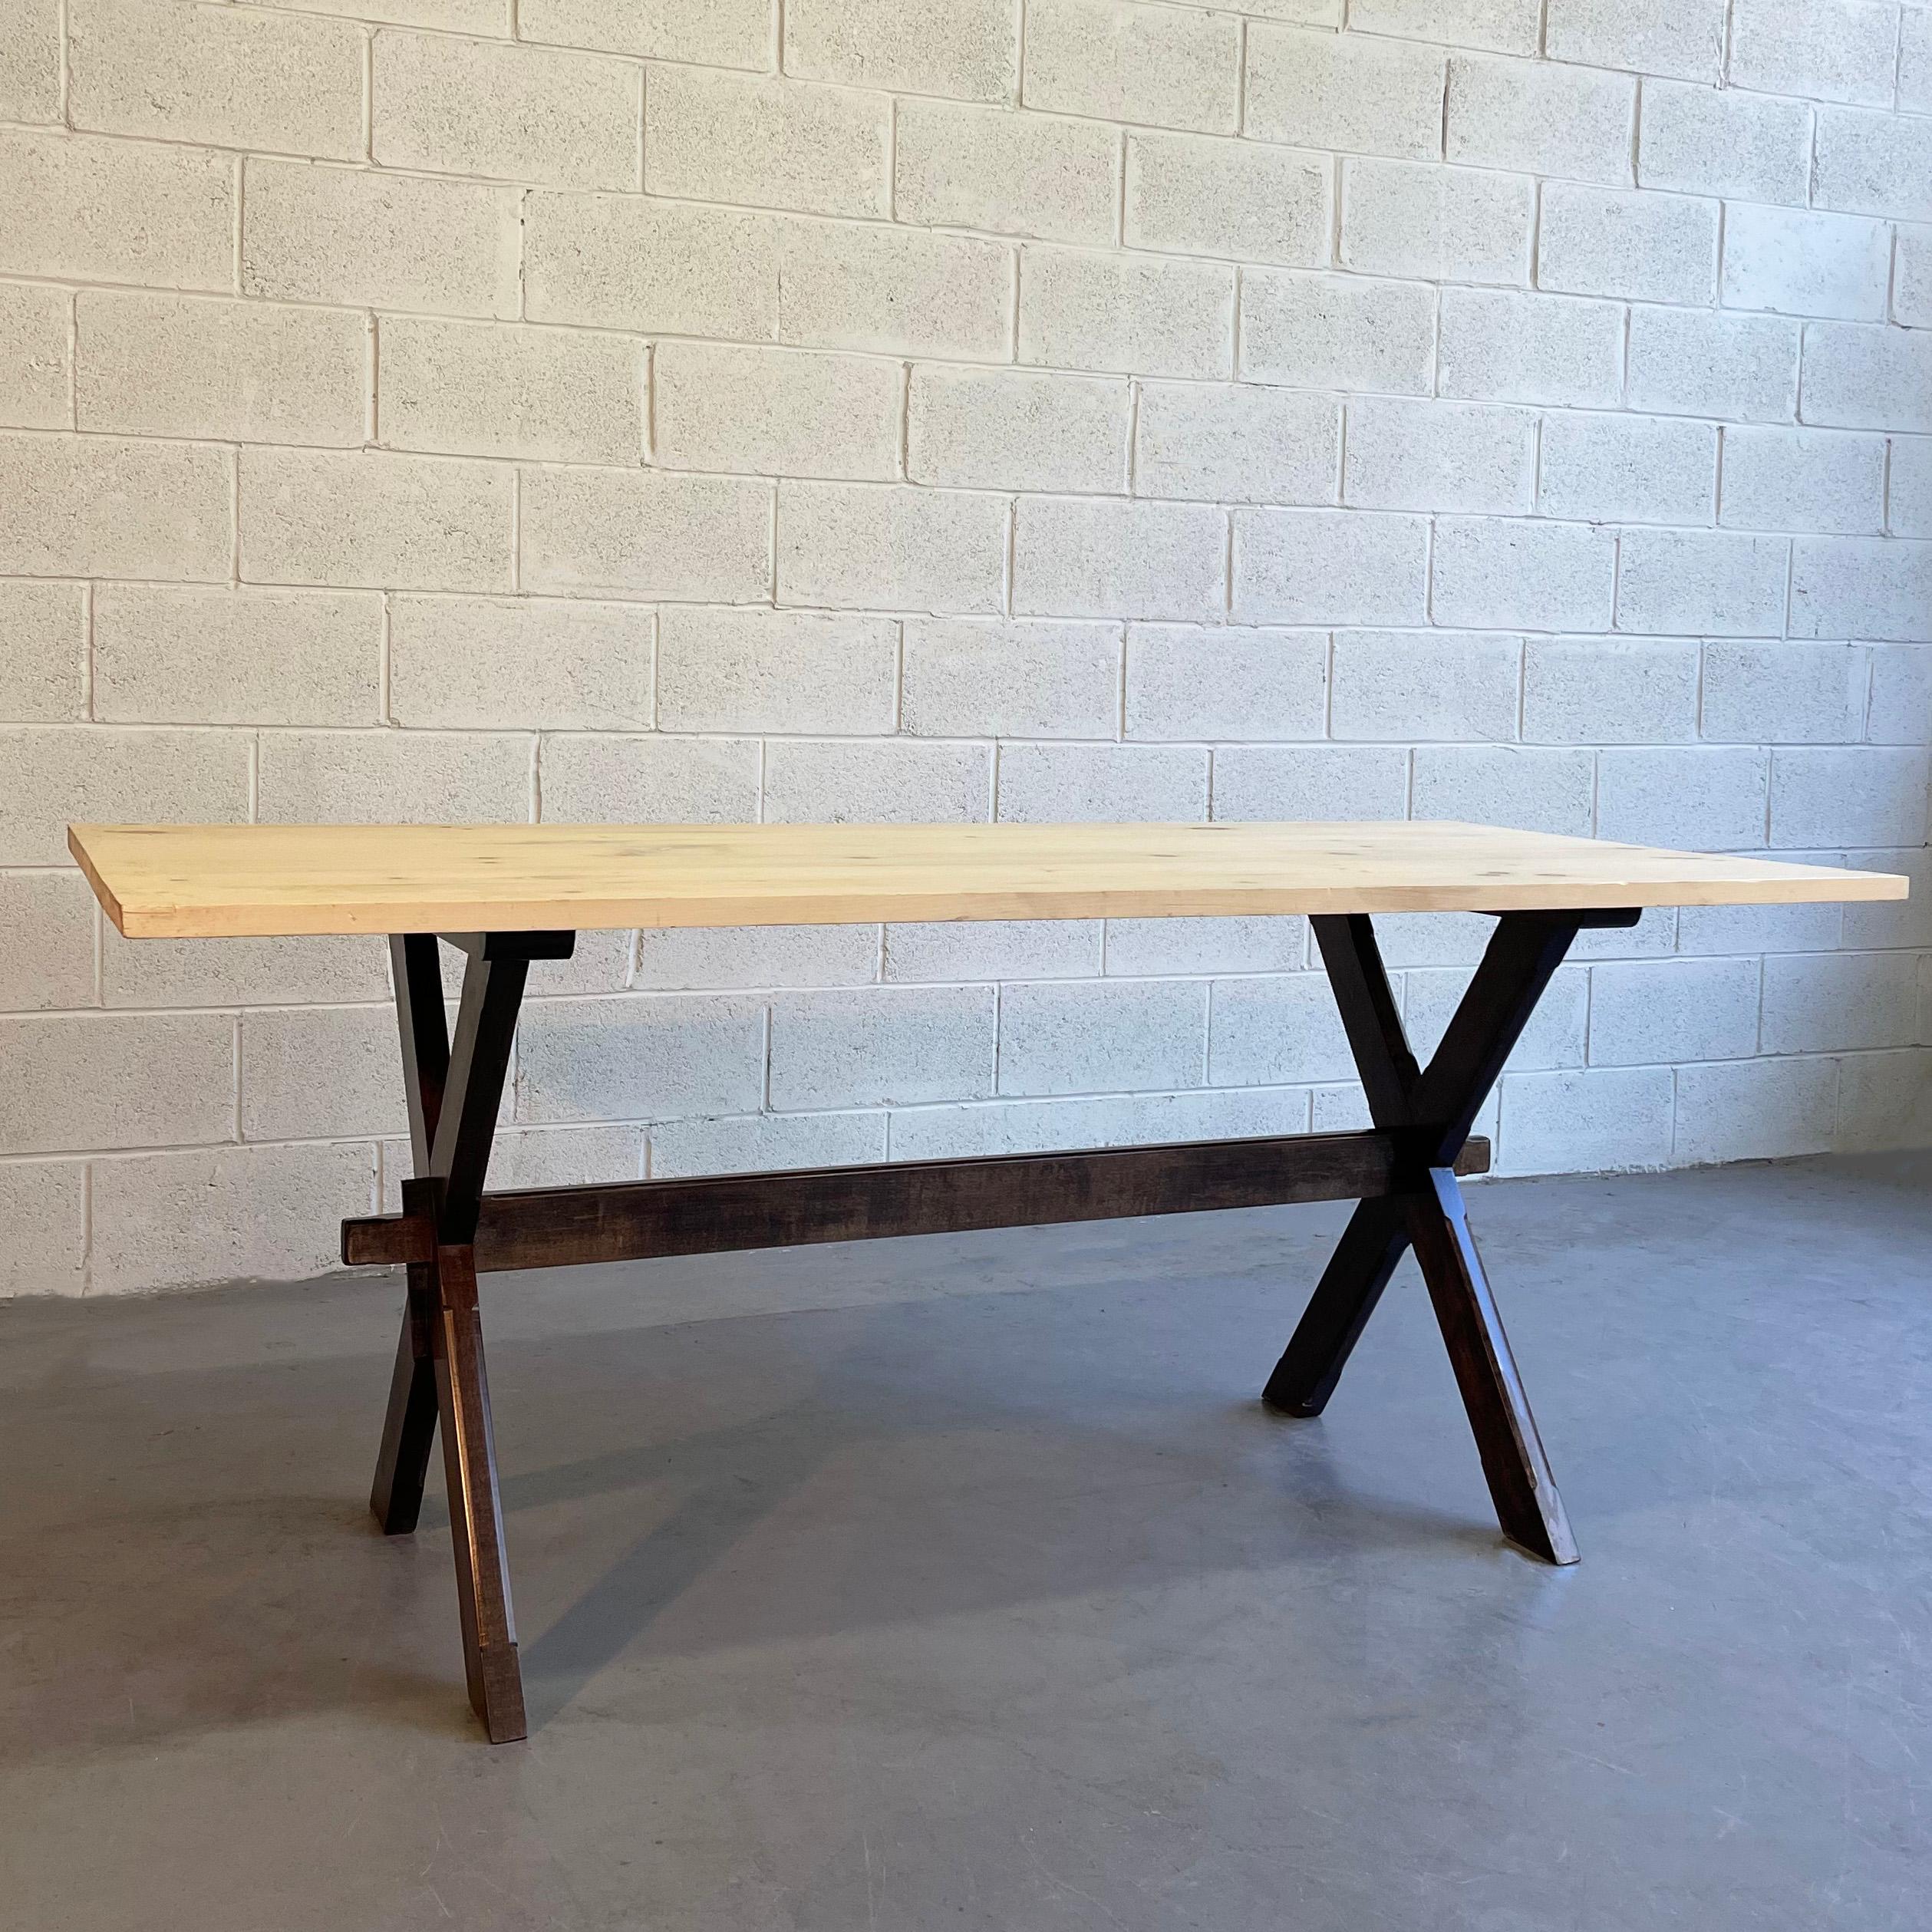 cFsignature, country, farm table features a maple trestle, X base with pine top. The top is unfinished and can be finished to spec for an additional $300. The table seats 6 for dining or can be used as a desk or work table. Made in Brooklyn by